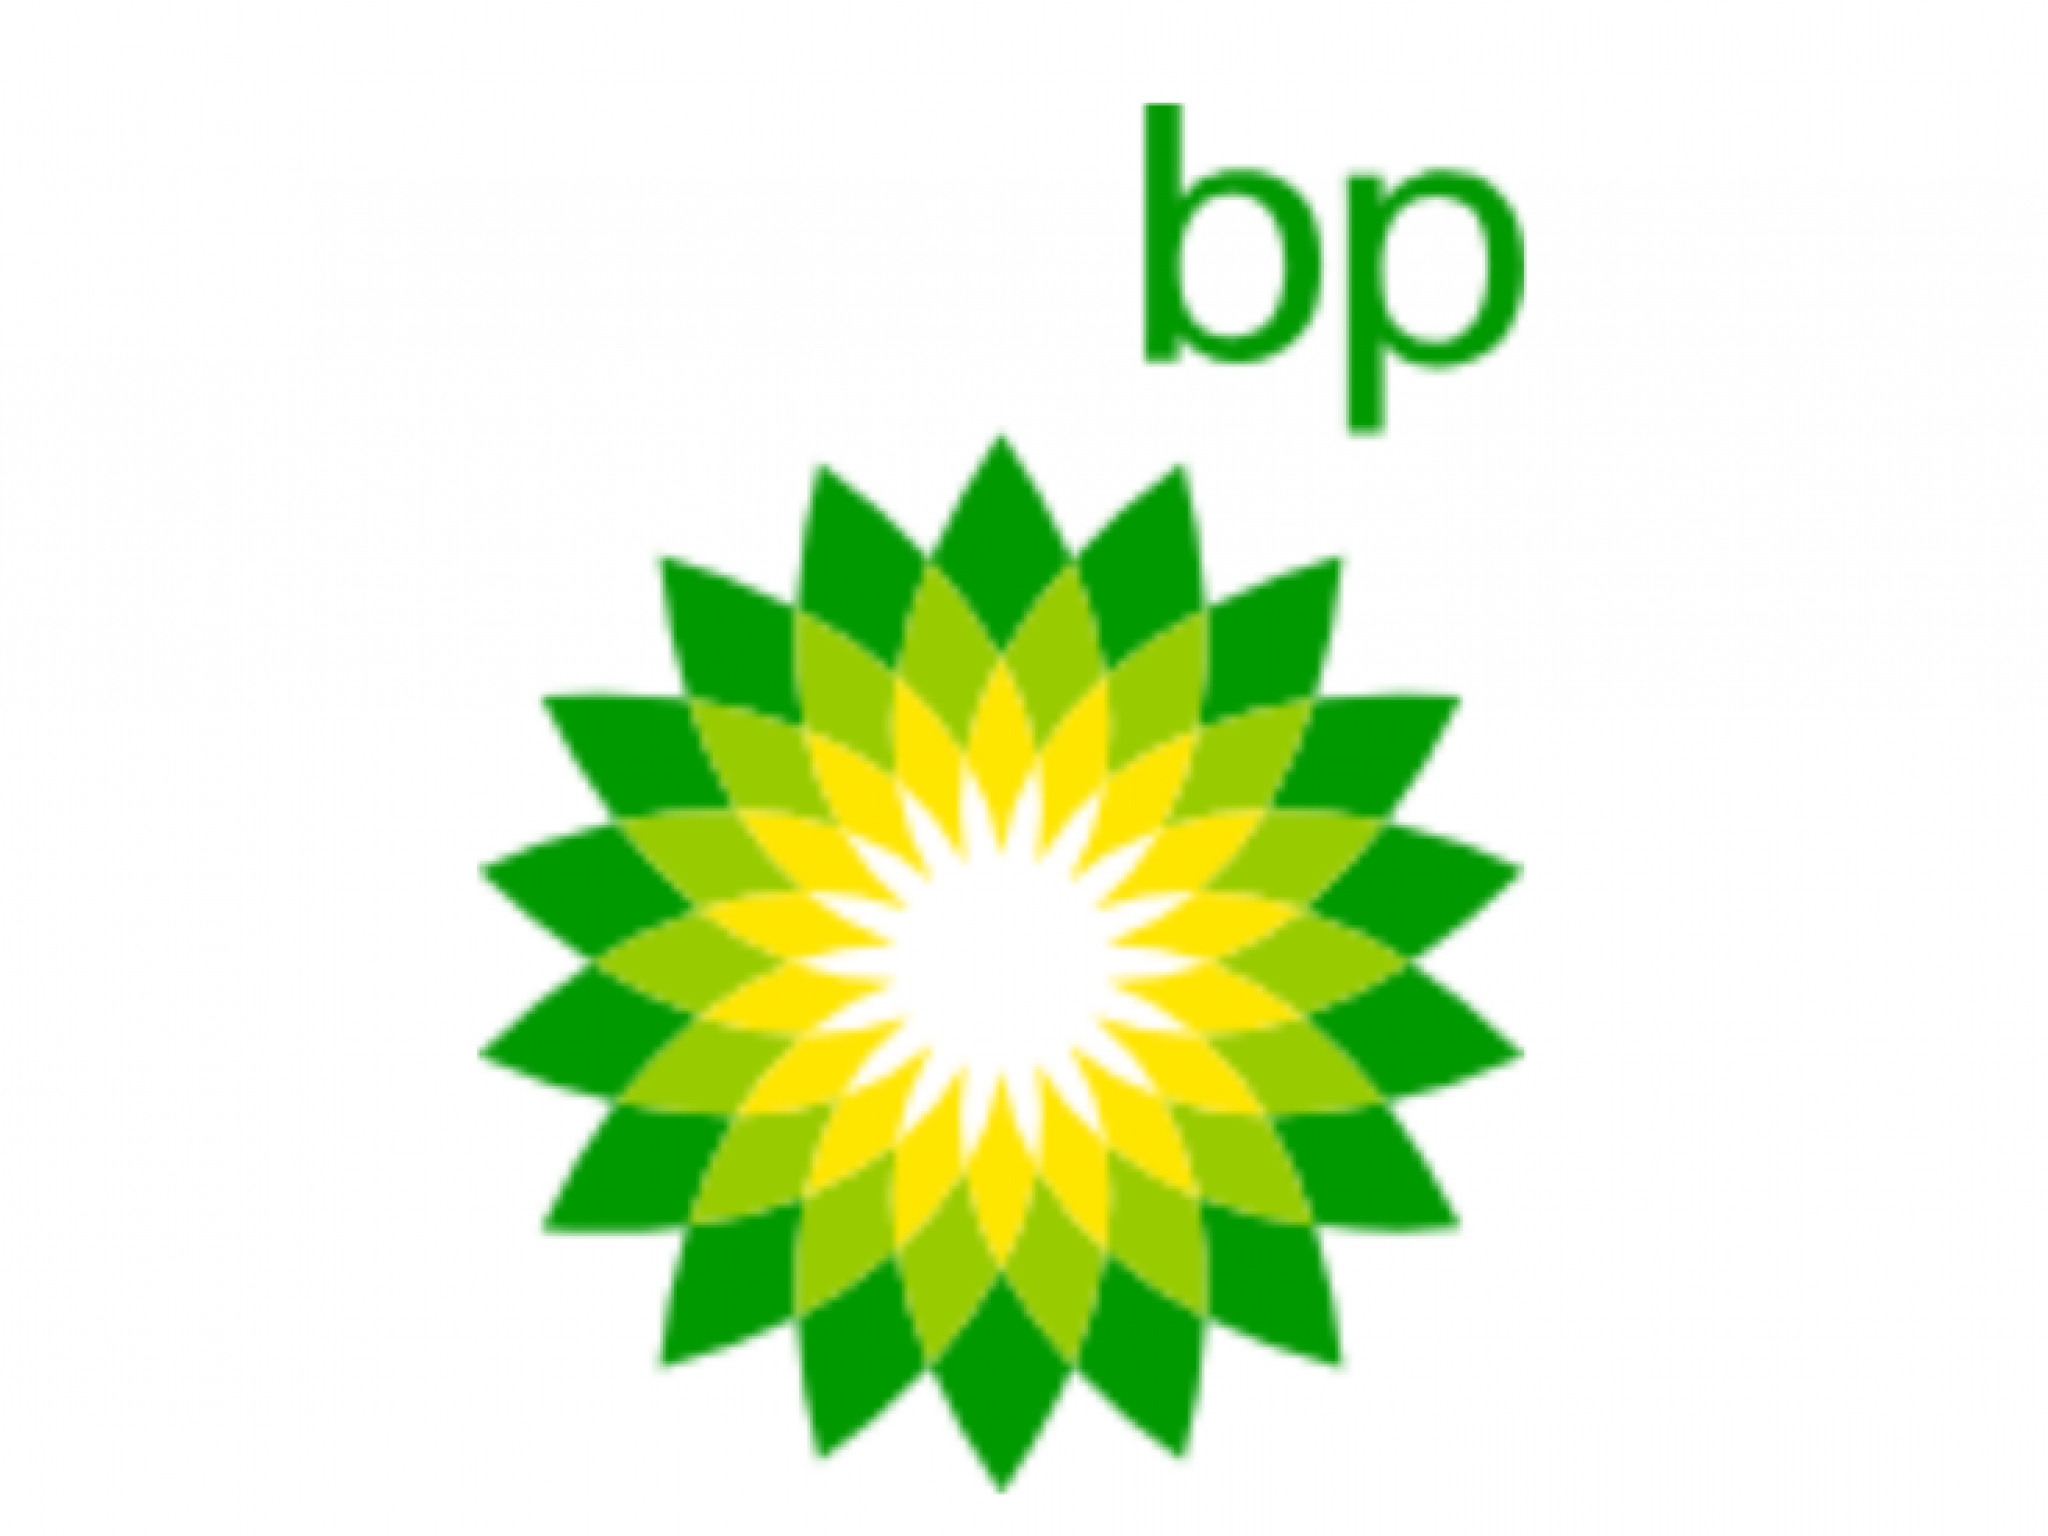  bp-tightens-workplace-relationship-rules-after-ceo-firing-report 